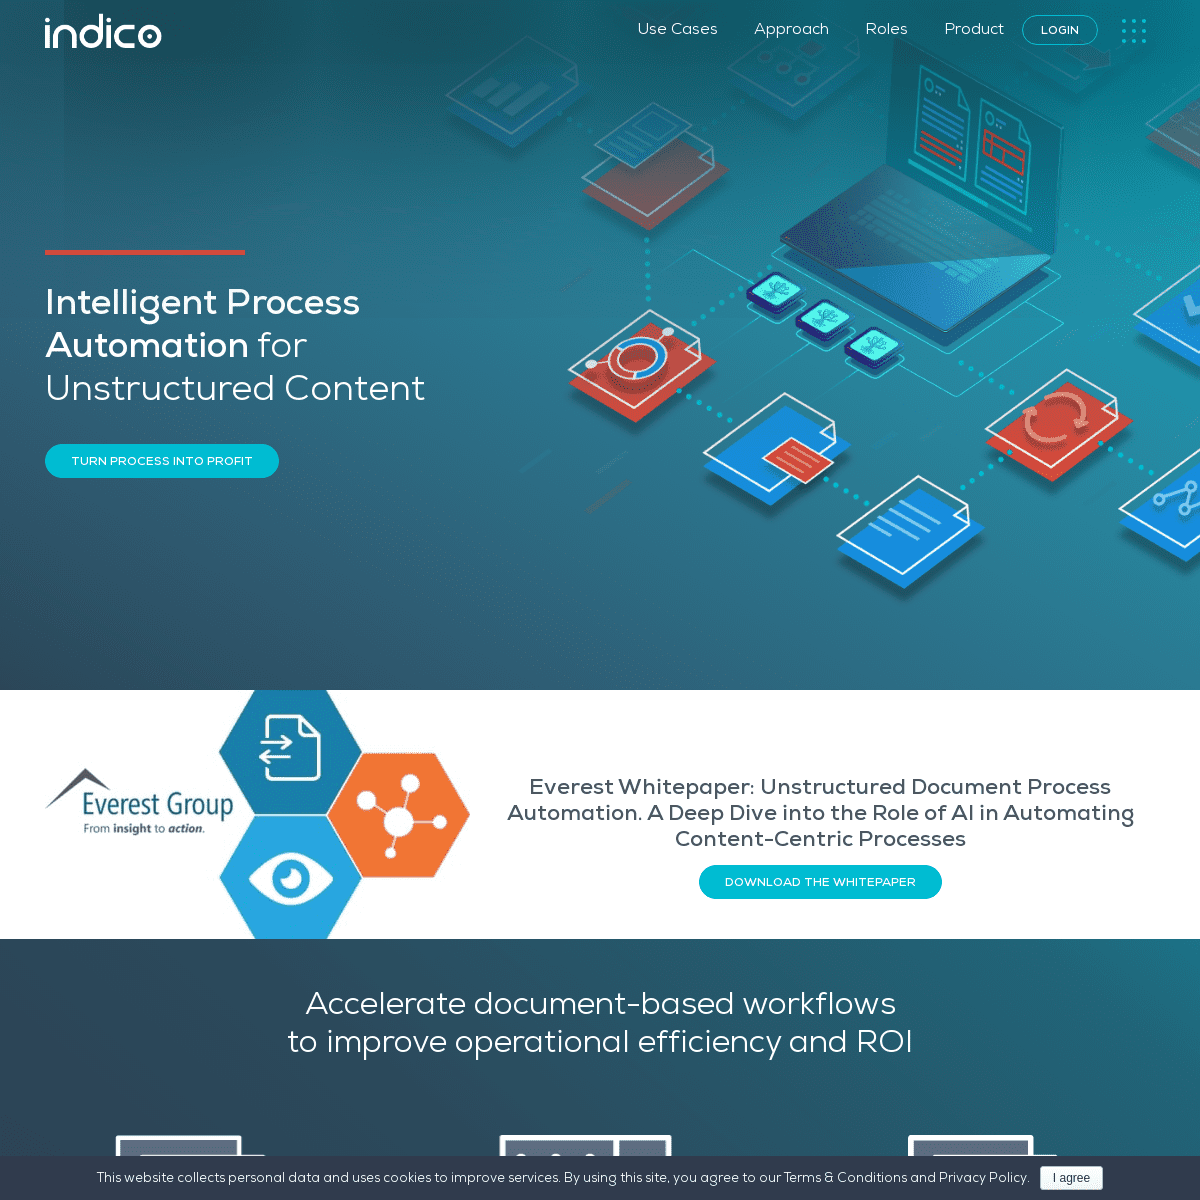 A complete backup of indico.io